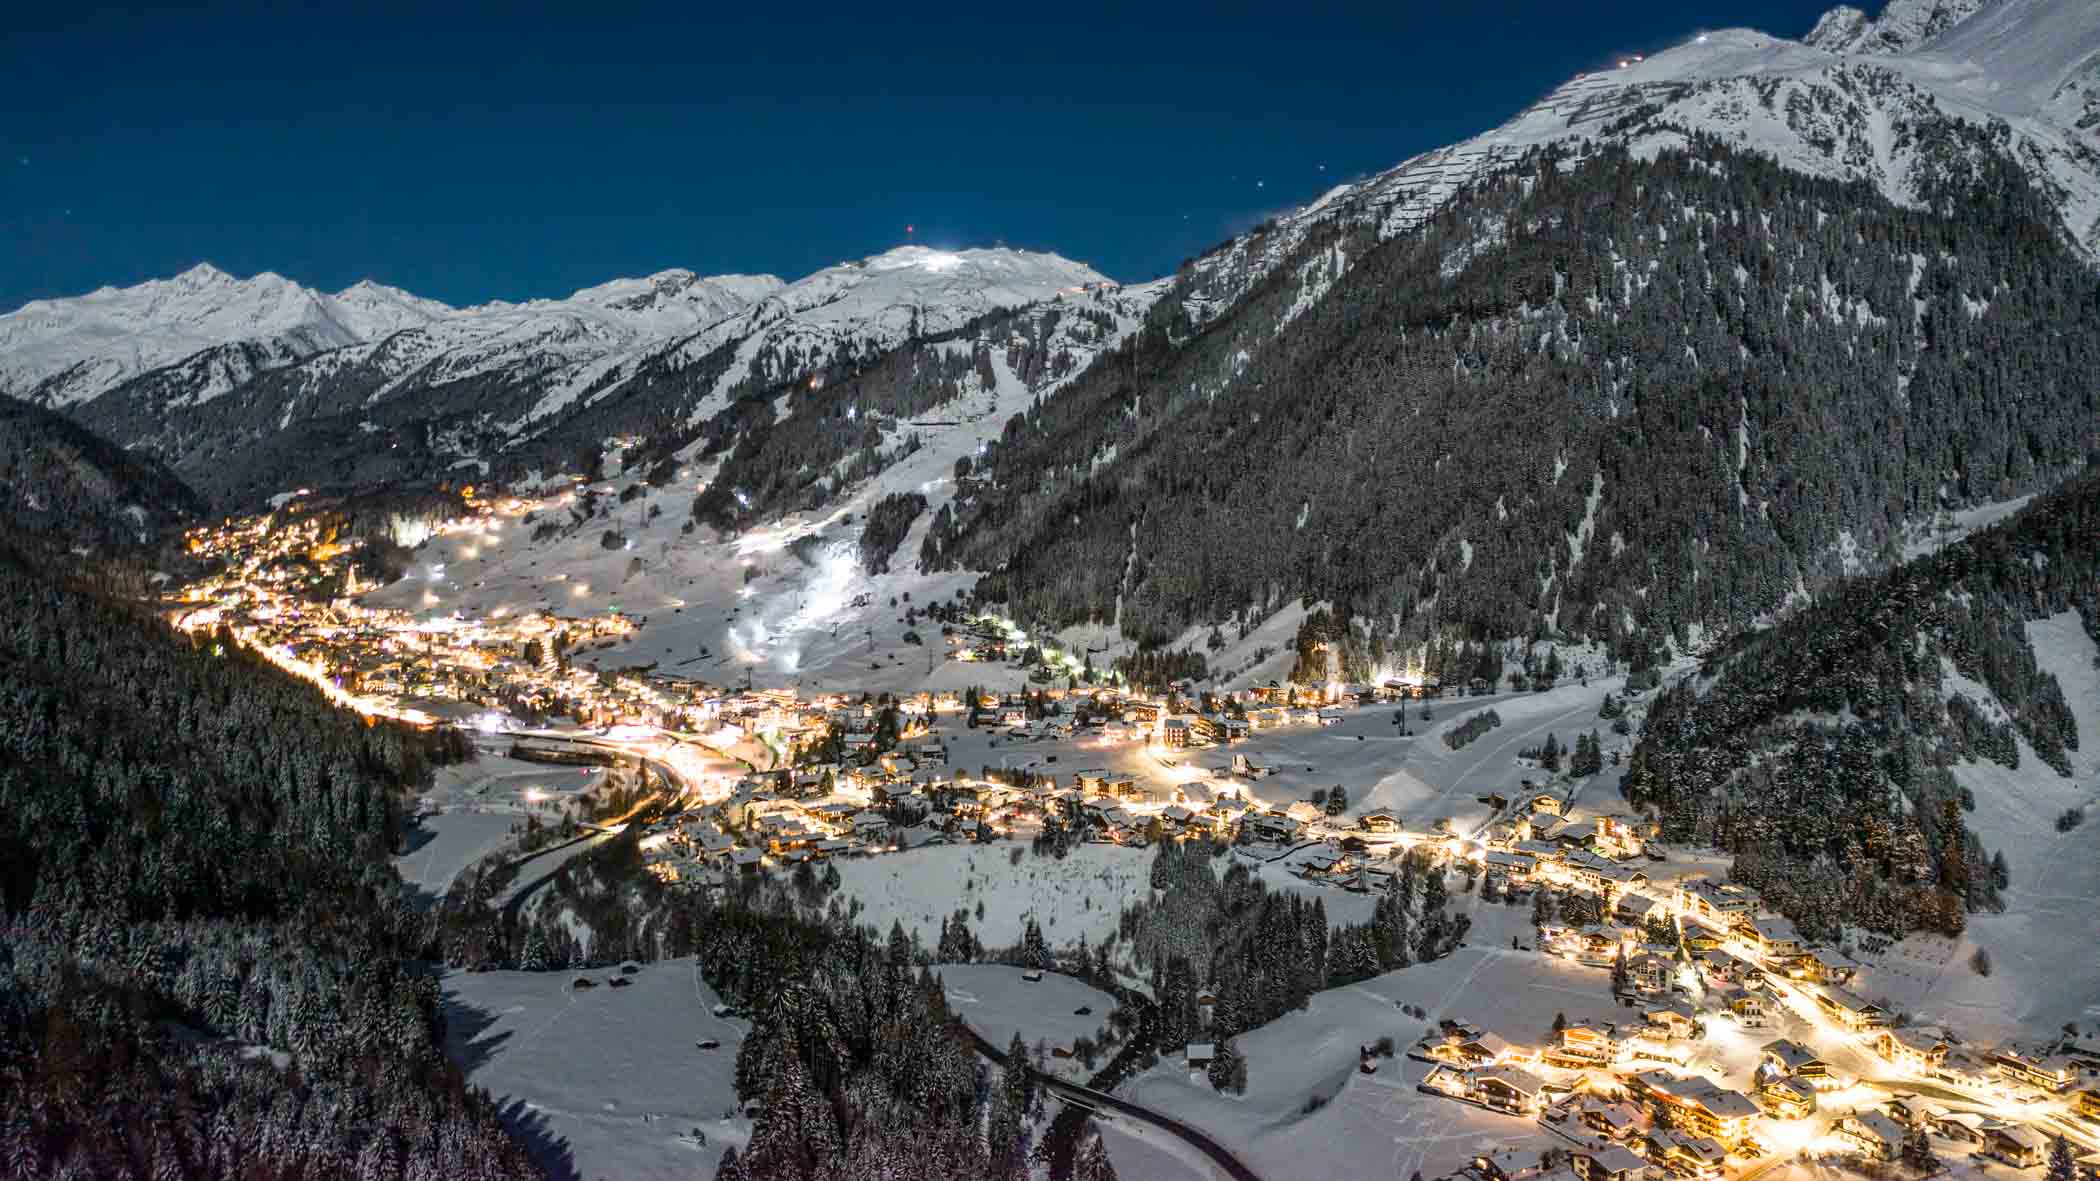 St Anton shot from above, lit up at night, sprawling across the valley floor